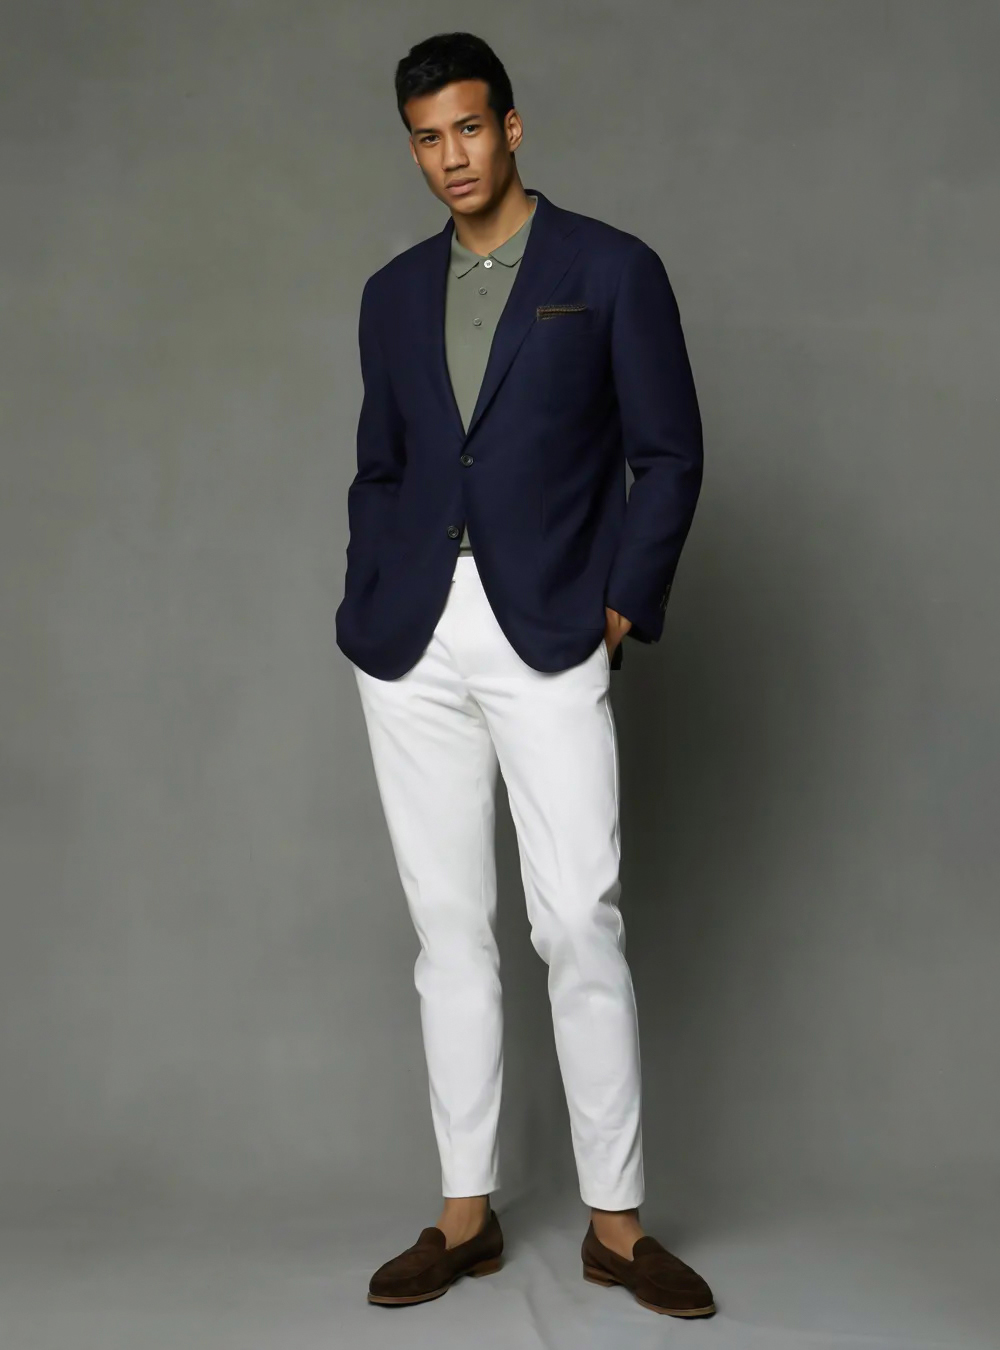 navy blazer, olive green polo shirt, white pants, and brown suede loafers